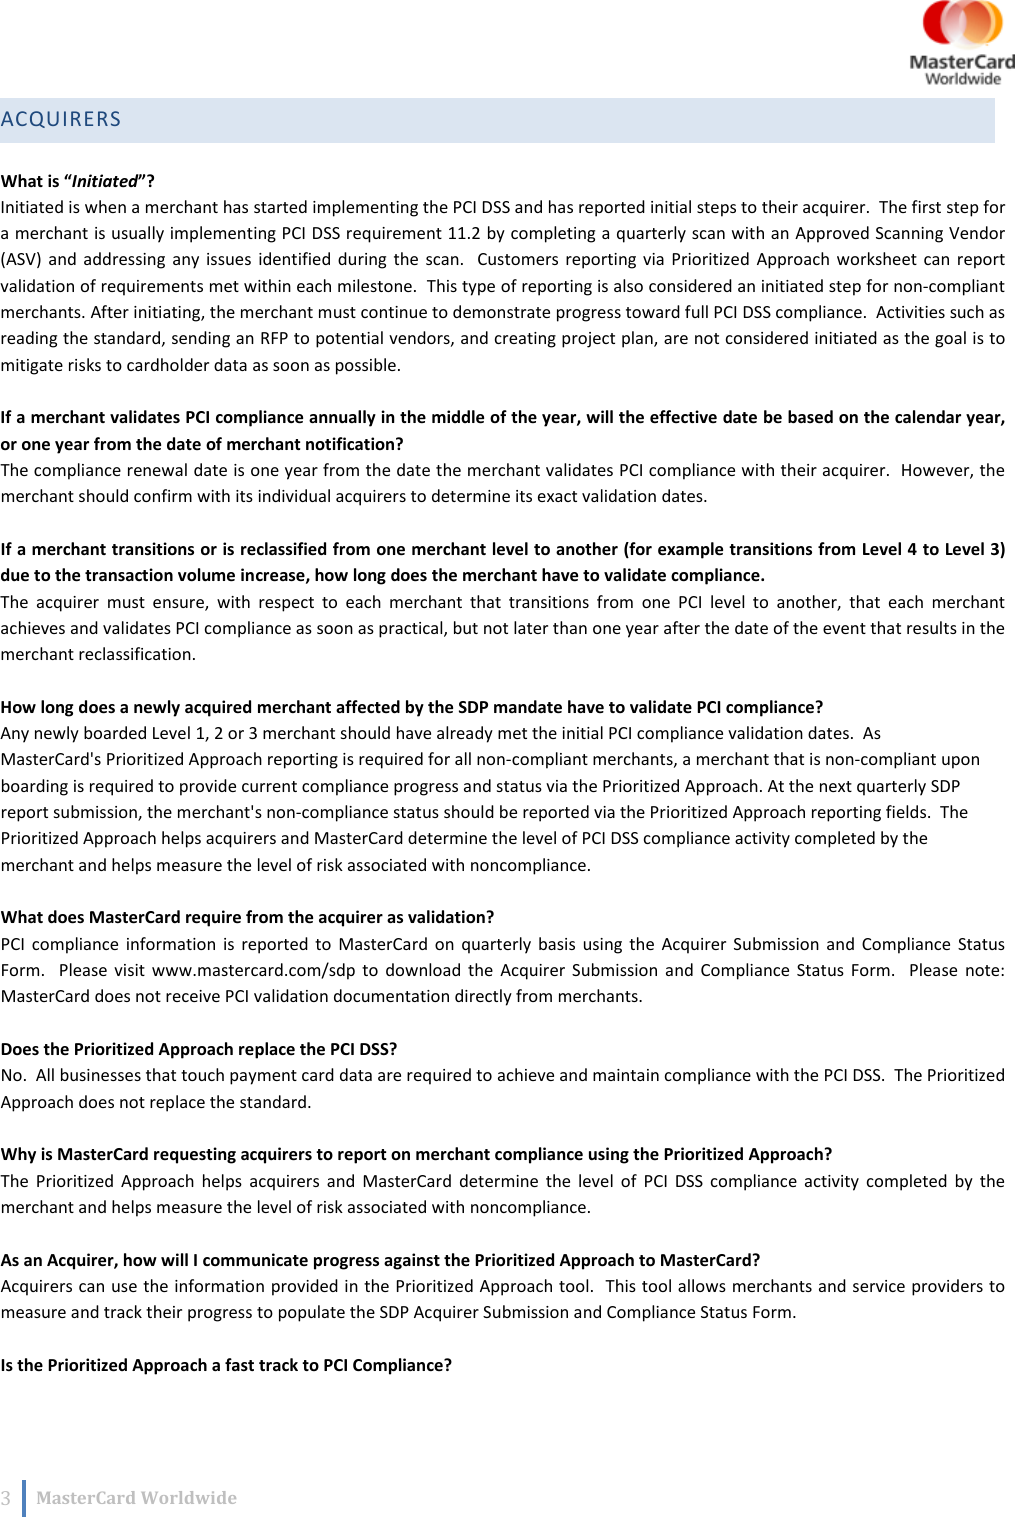 Page 3 of 5 - Frequently Asked Questions Nov 2013